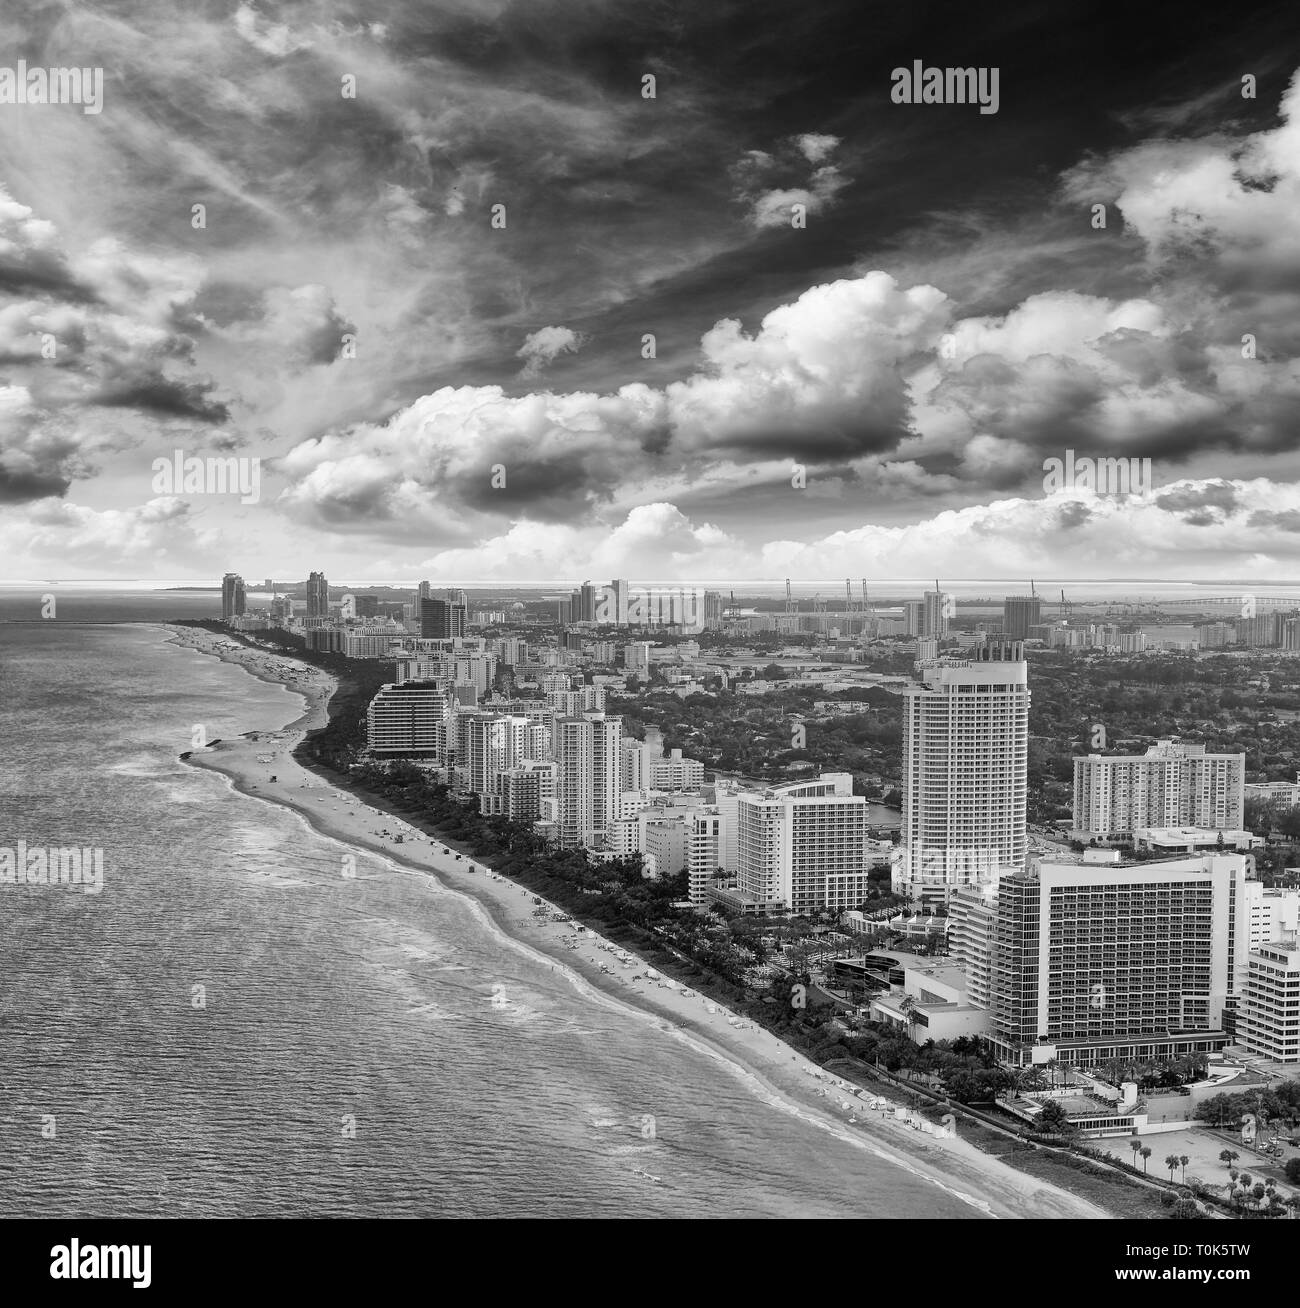 Amazing skyline of Miami Beach. Aerial view of city buildings from helicopter on a cloudy sunset. Stock Photo